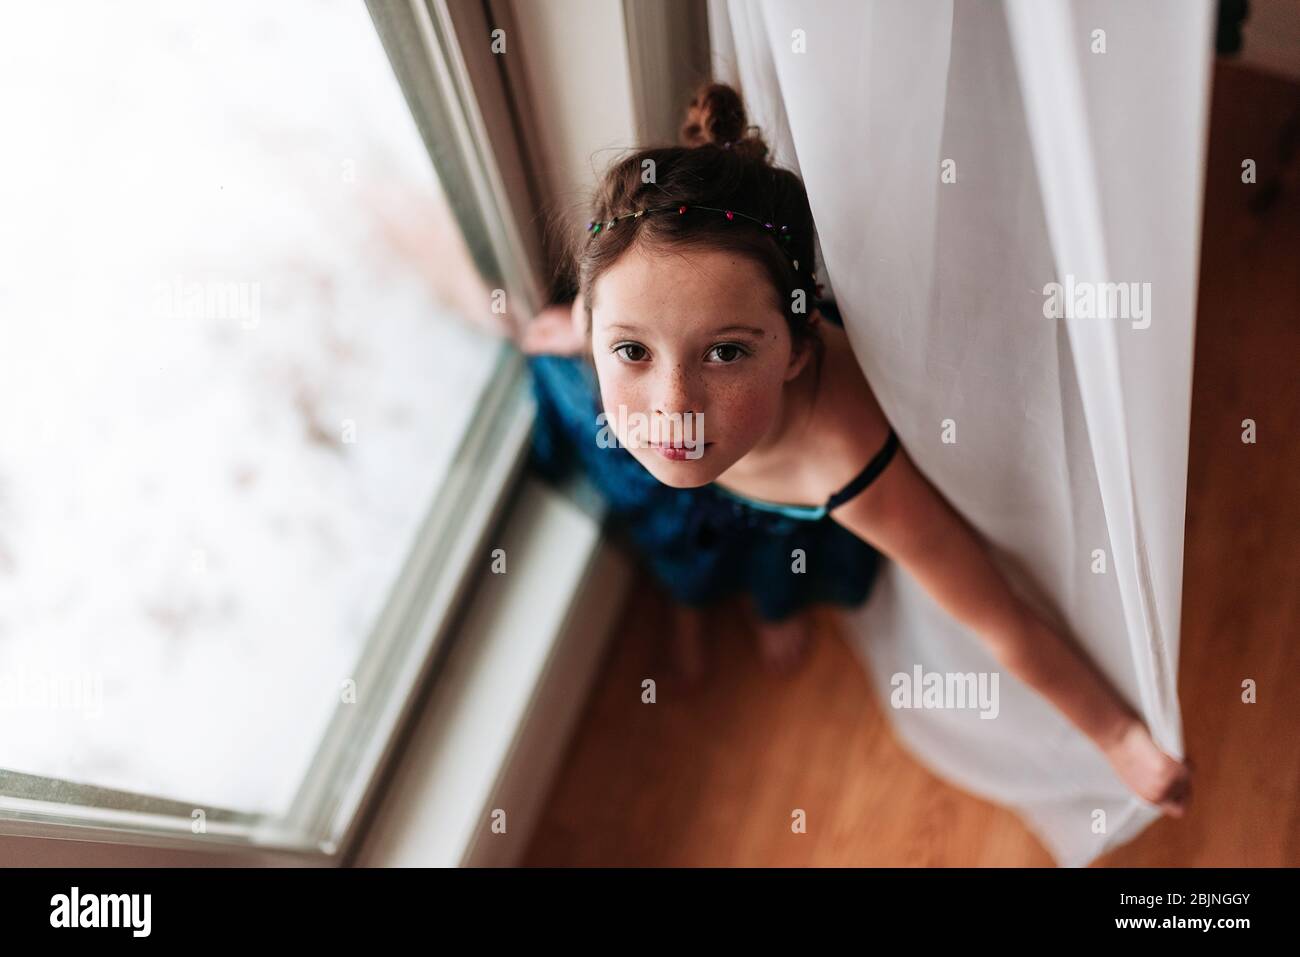 Overhead view of a girl standing by a window Stock Photo